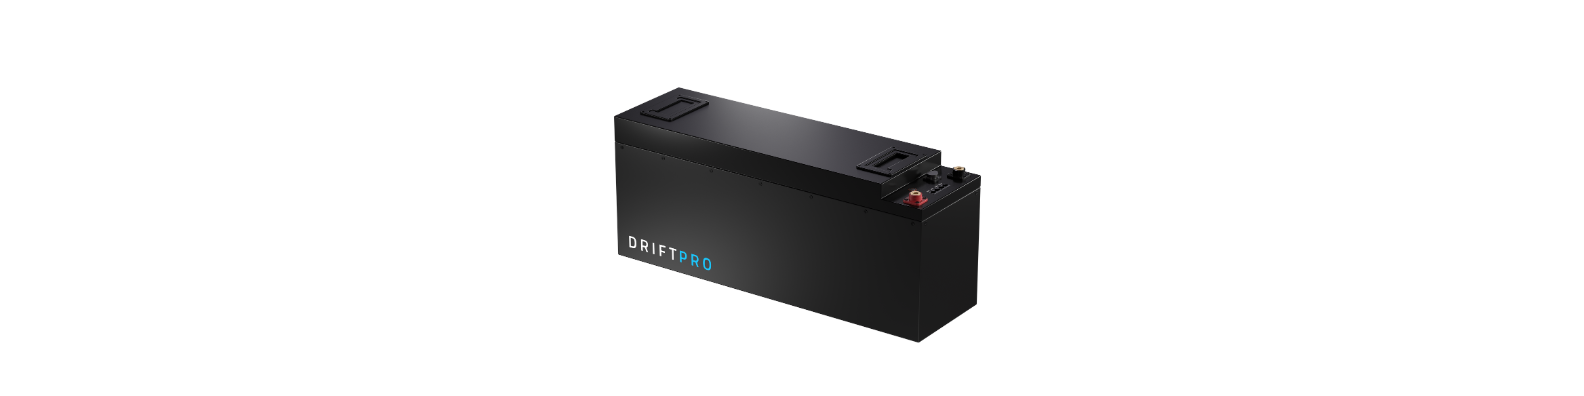 Drift PRO - (probably) the best leisure battery in the world